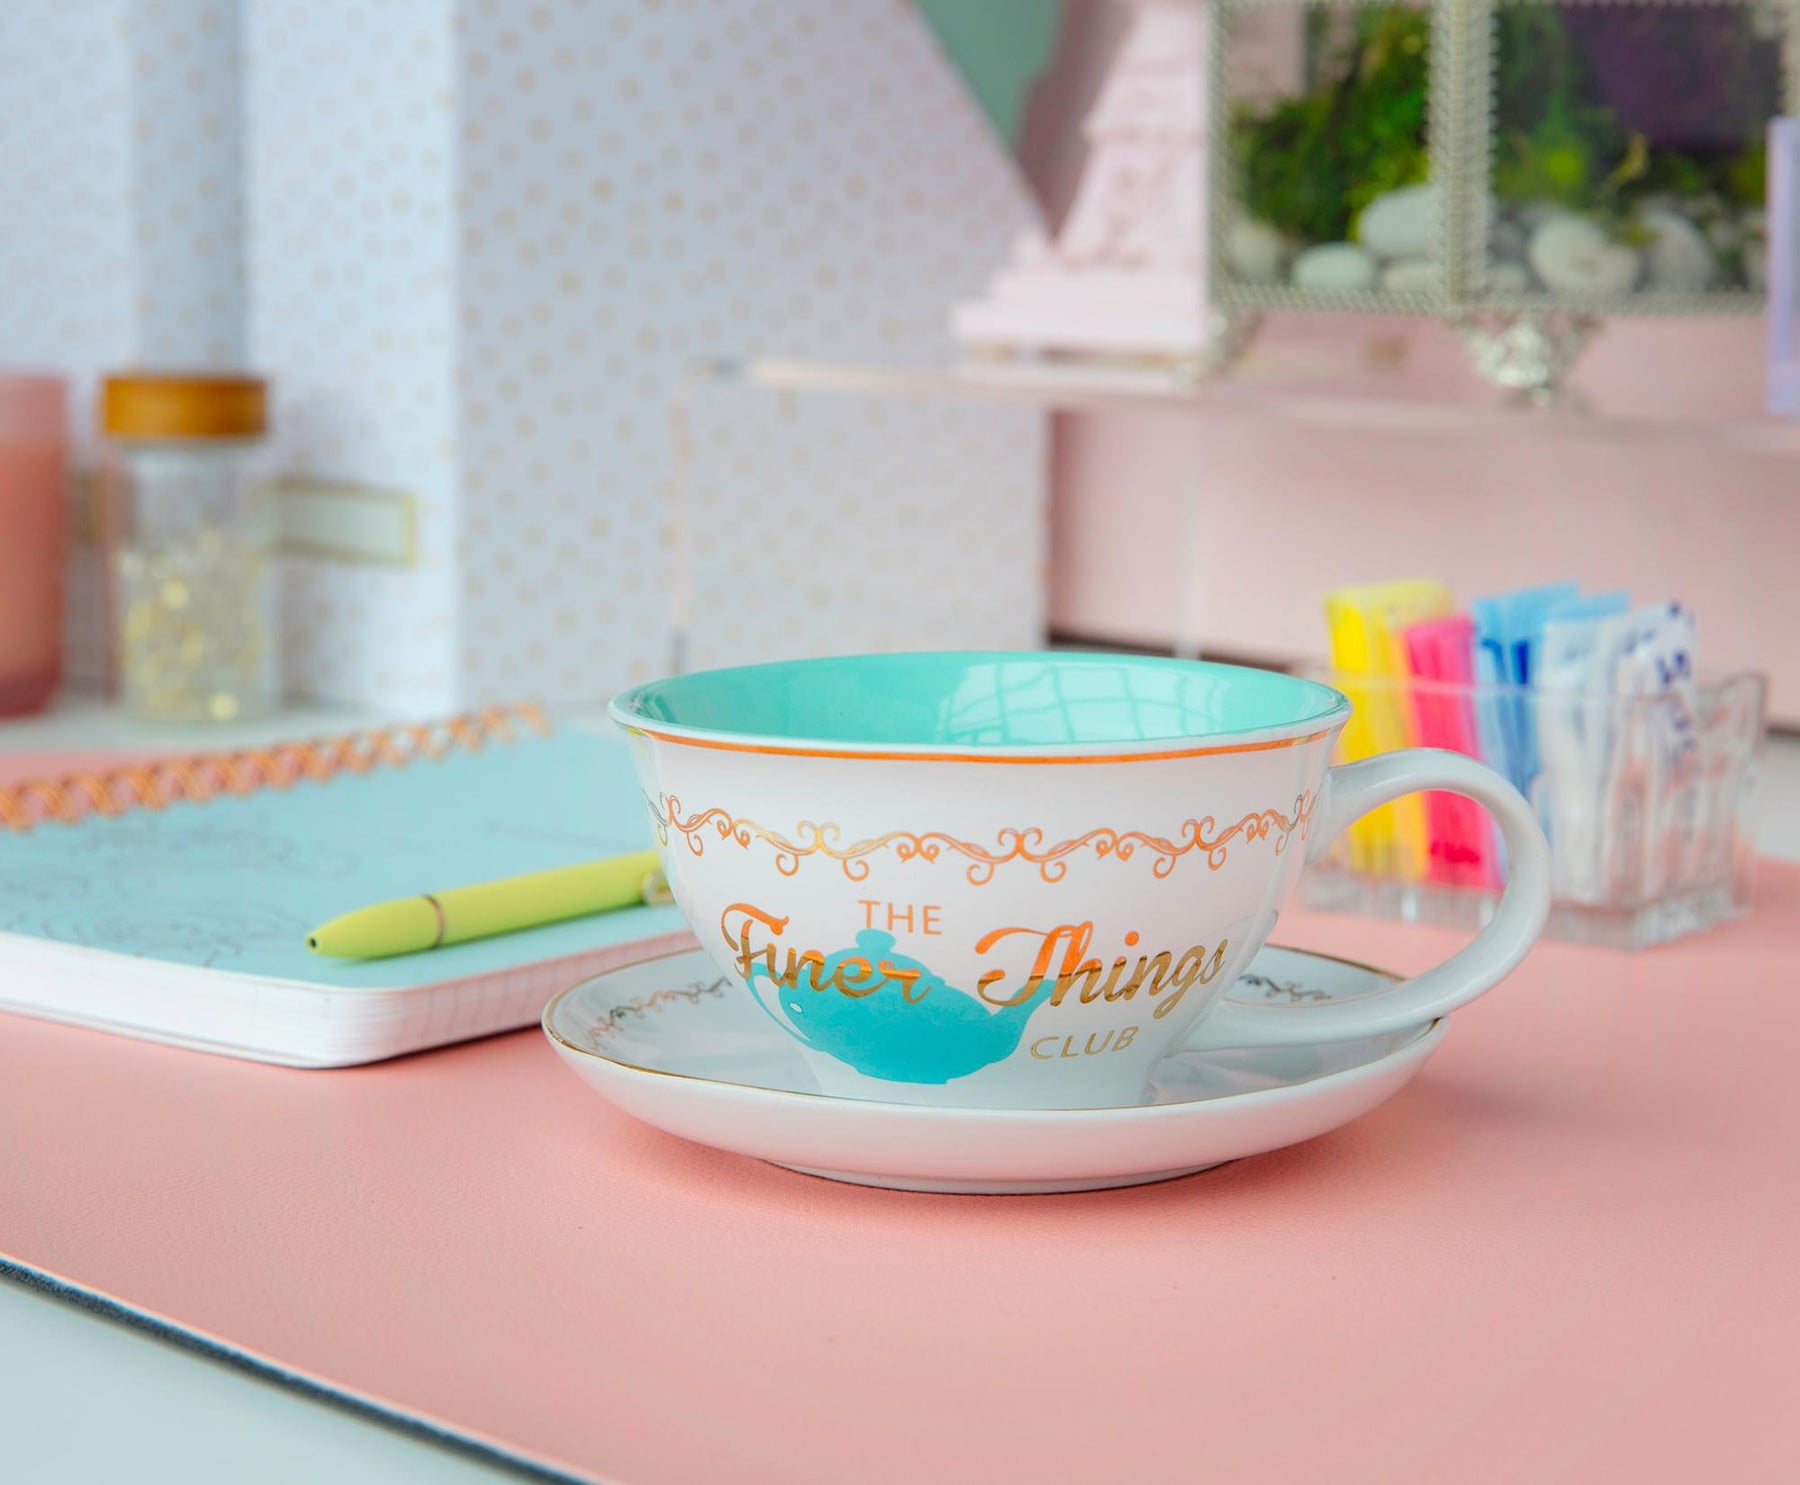 The Office Finer Things Club Ceramic Teacup and Saucer Set